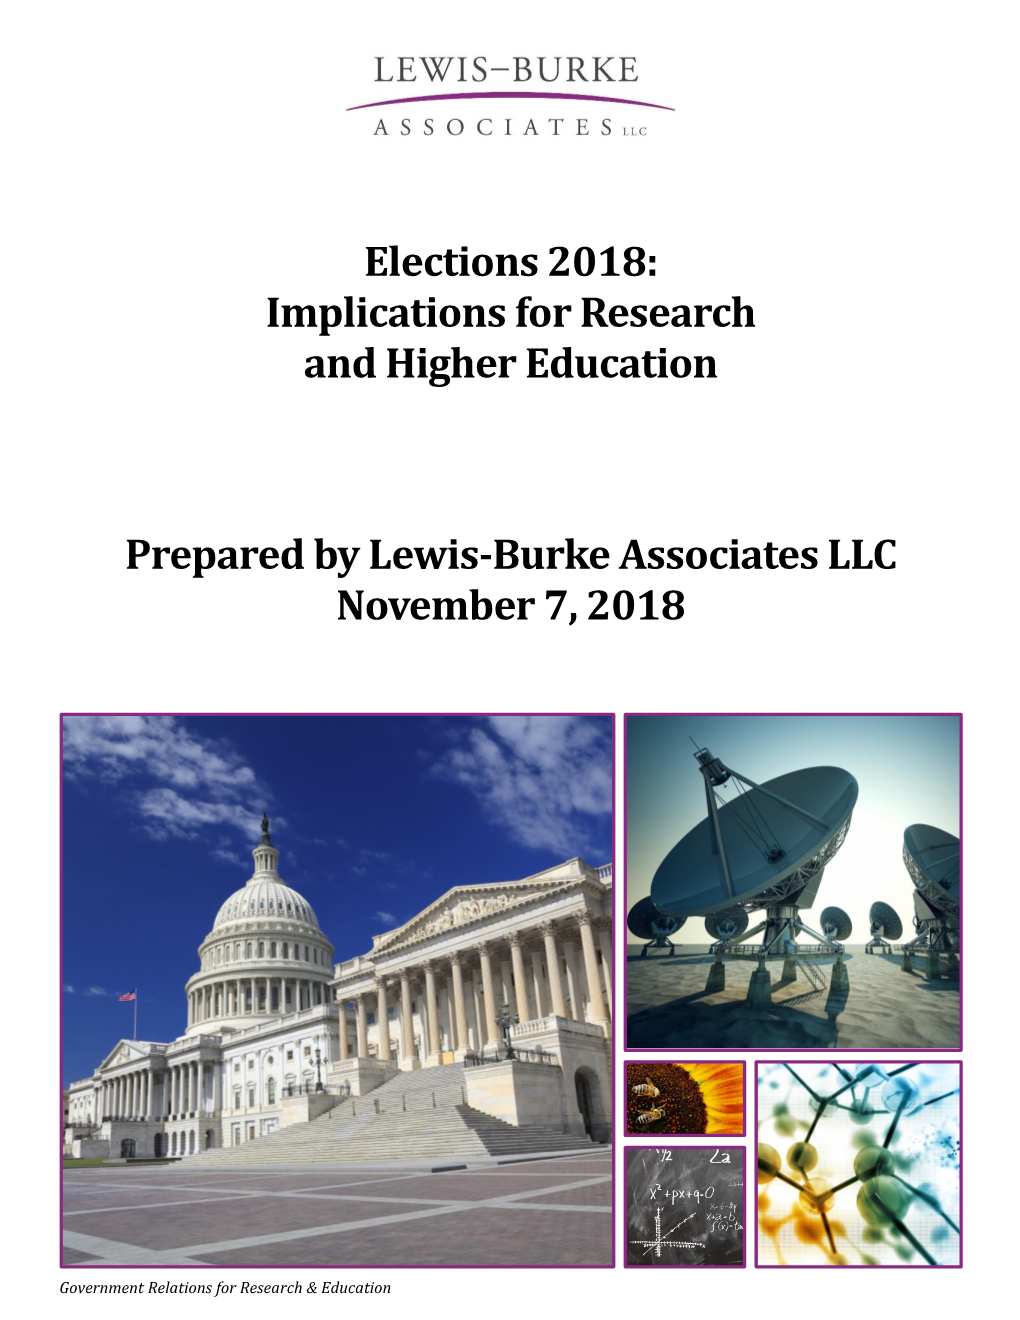 Elections 2018: Implications for Research and Higher Education